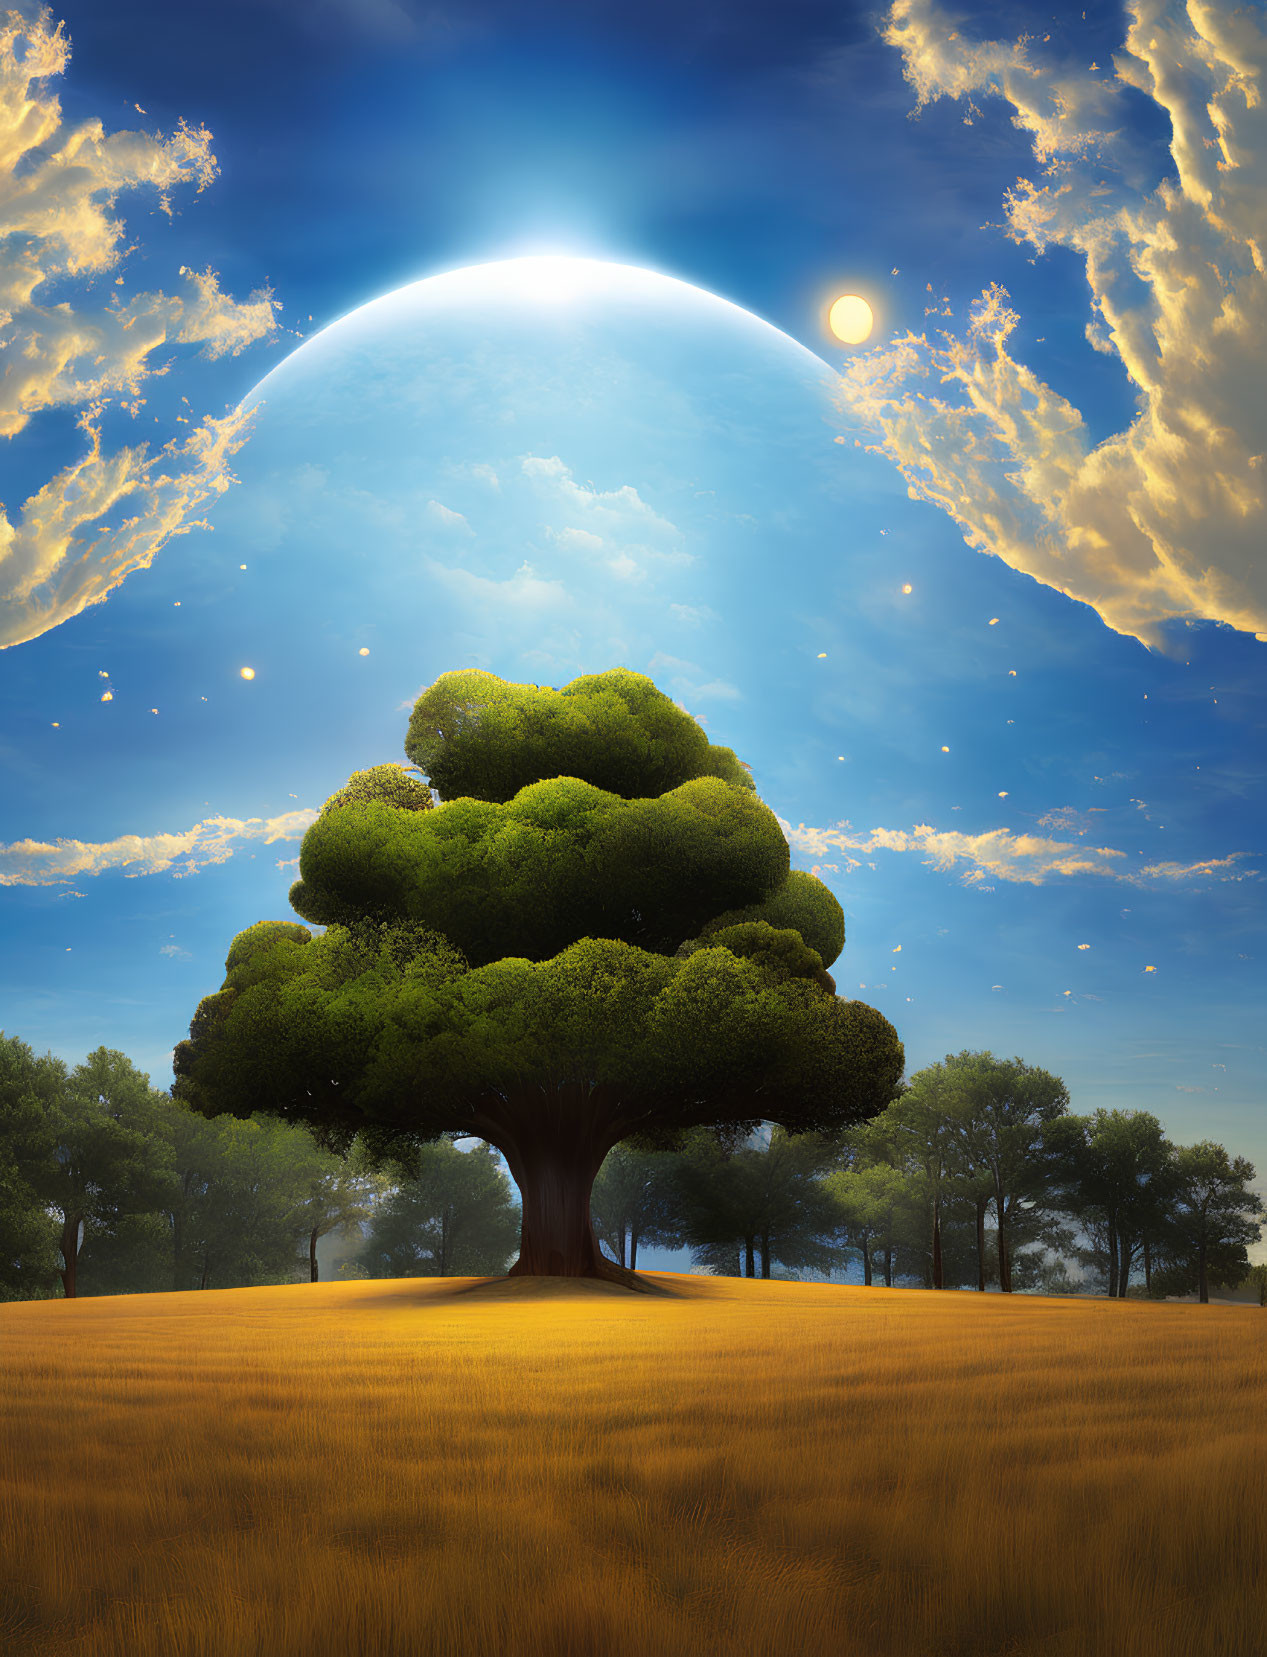 Vibrant green tree in golden field under surreal sky with glowing moon and firefly-like lights